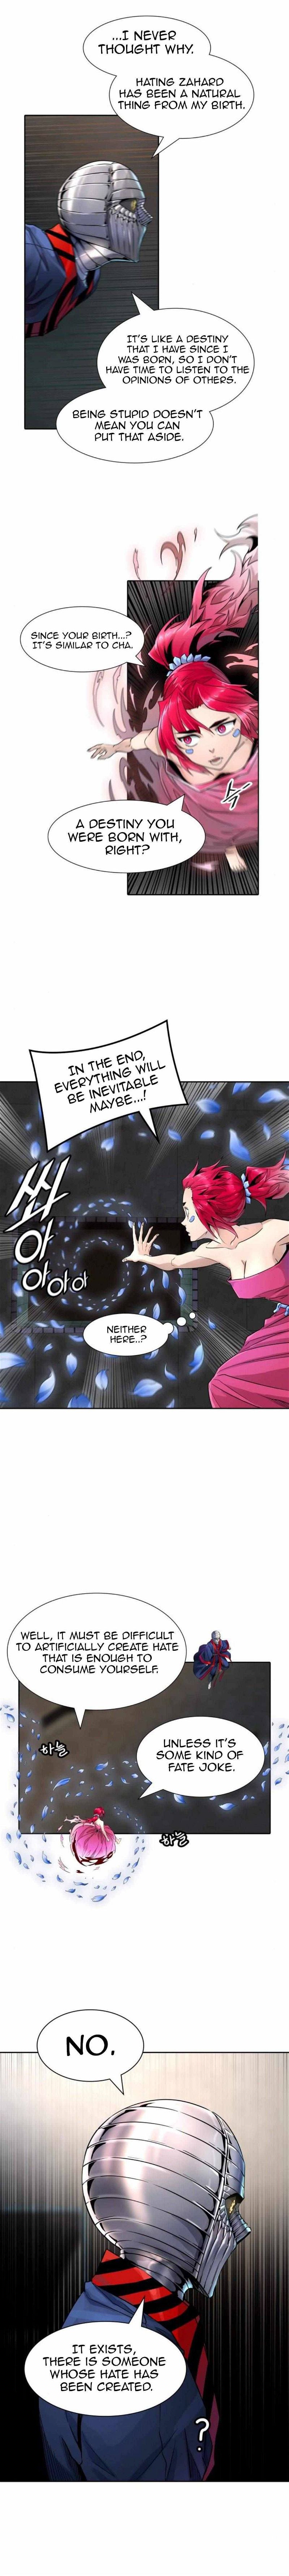 Tower of God Chapter 499 page 10